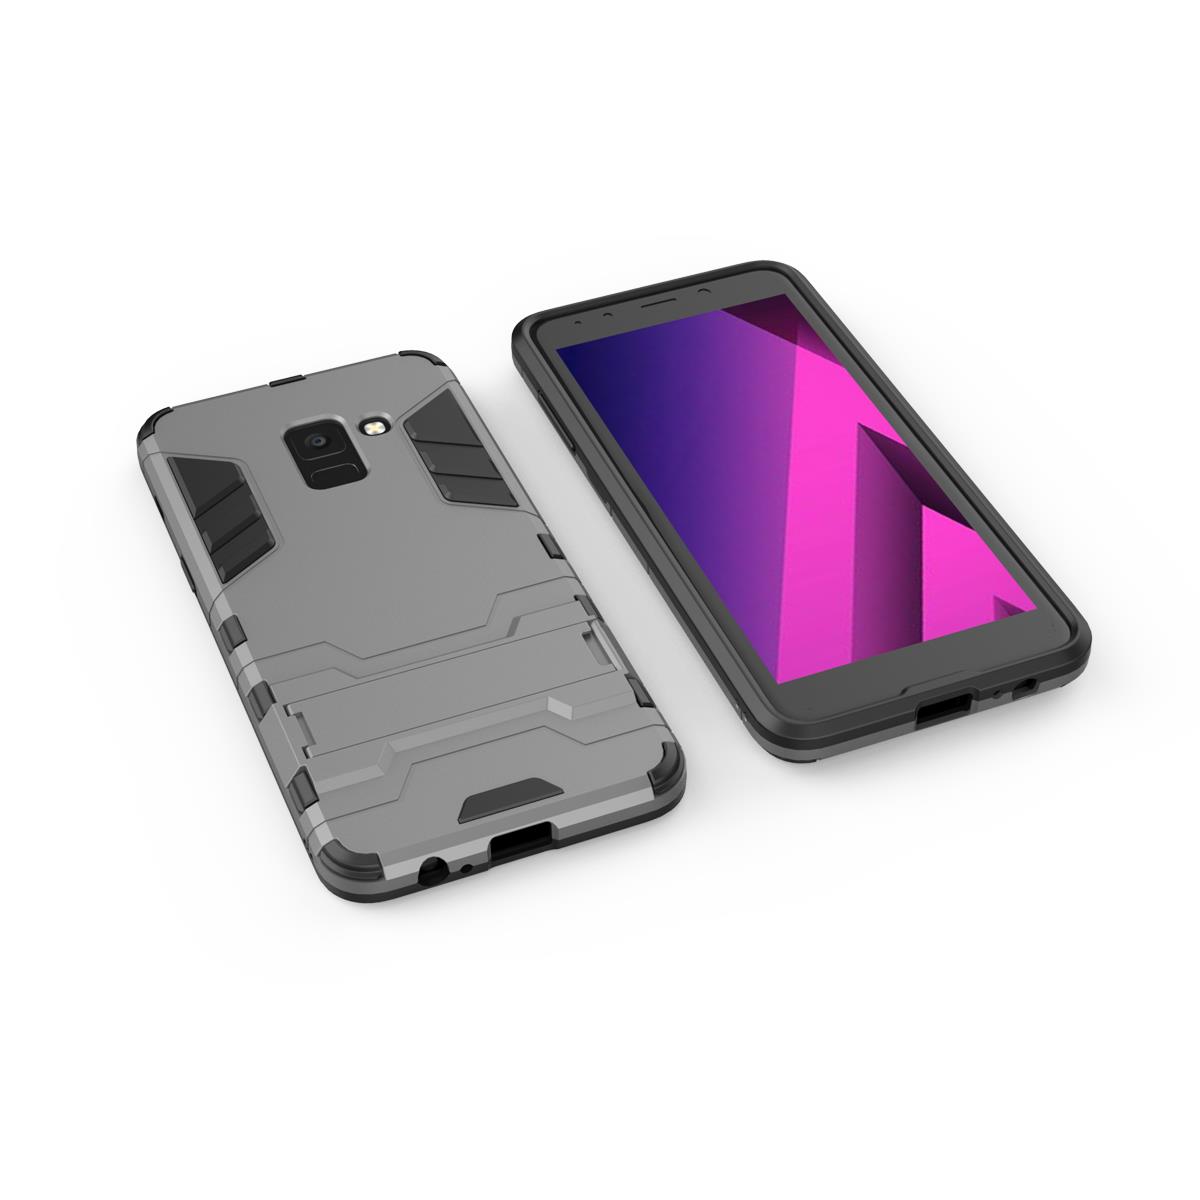 Bakeey-2-in-1-Armor-Kickstand-Hard-PC-Protective-Case-for-Samsung-Galaxy-A8-Plus-2018-1297009